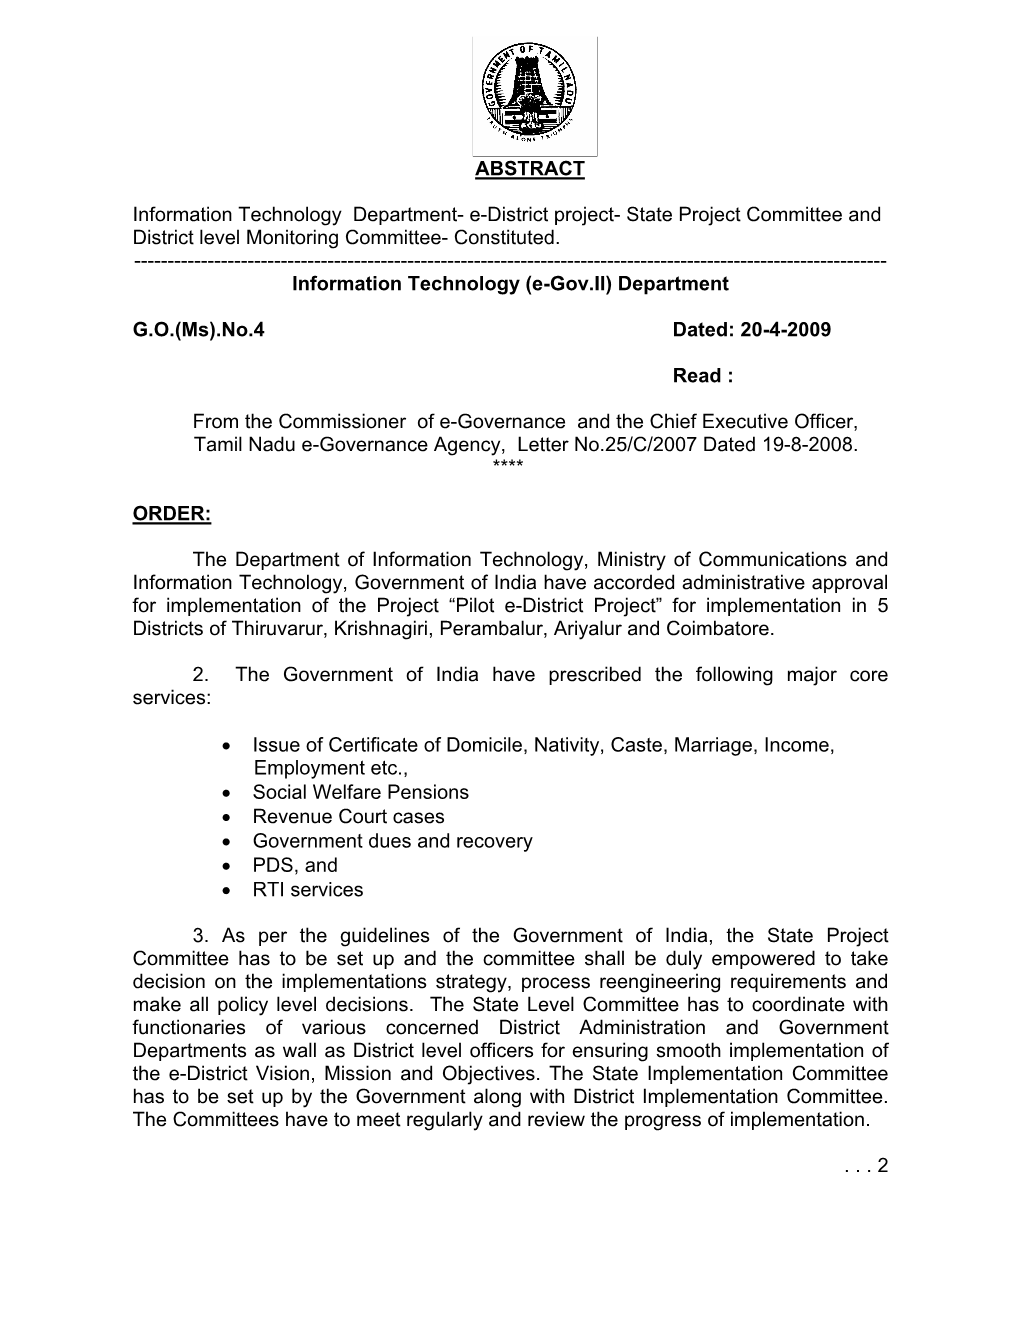 State Project Committee and District Level Monitoring Committee- Constituted